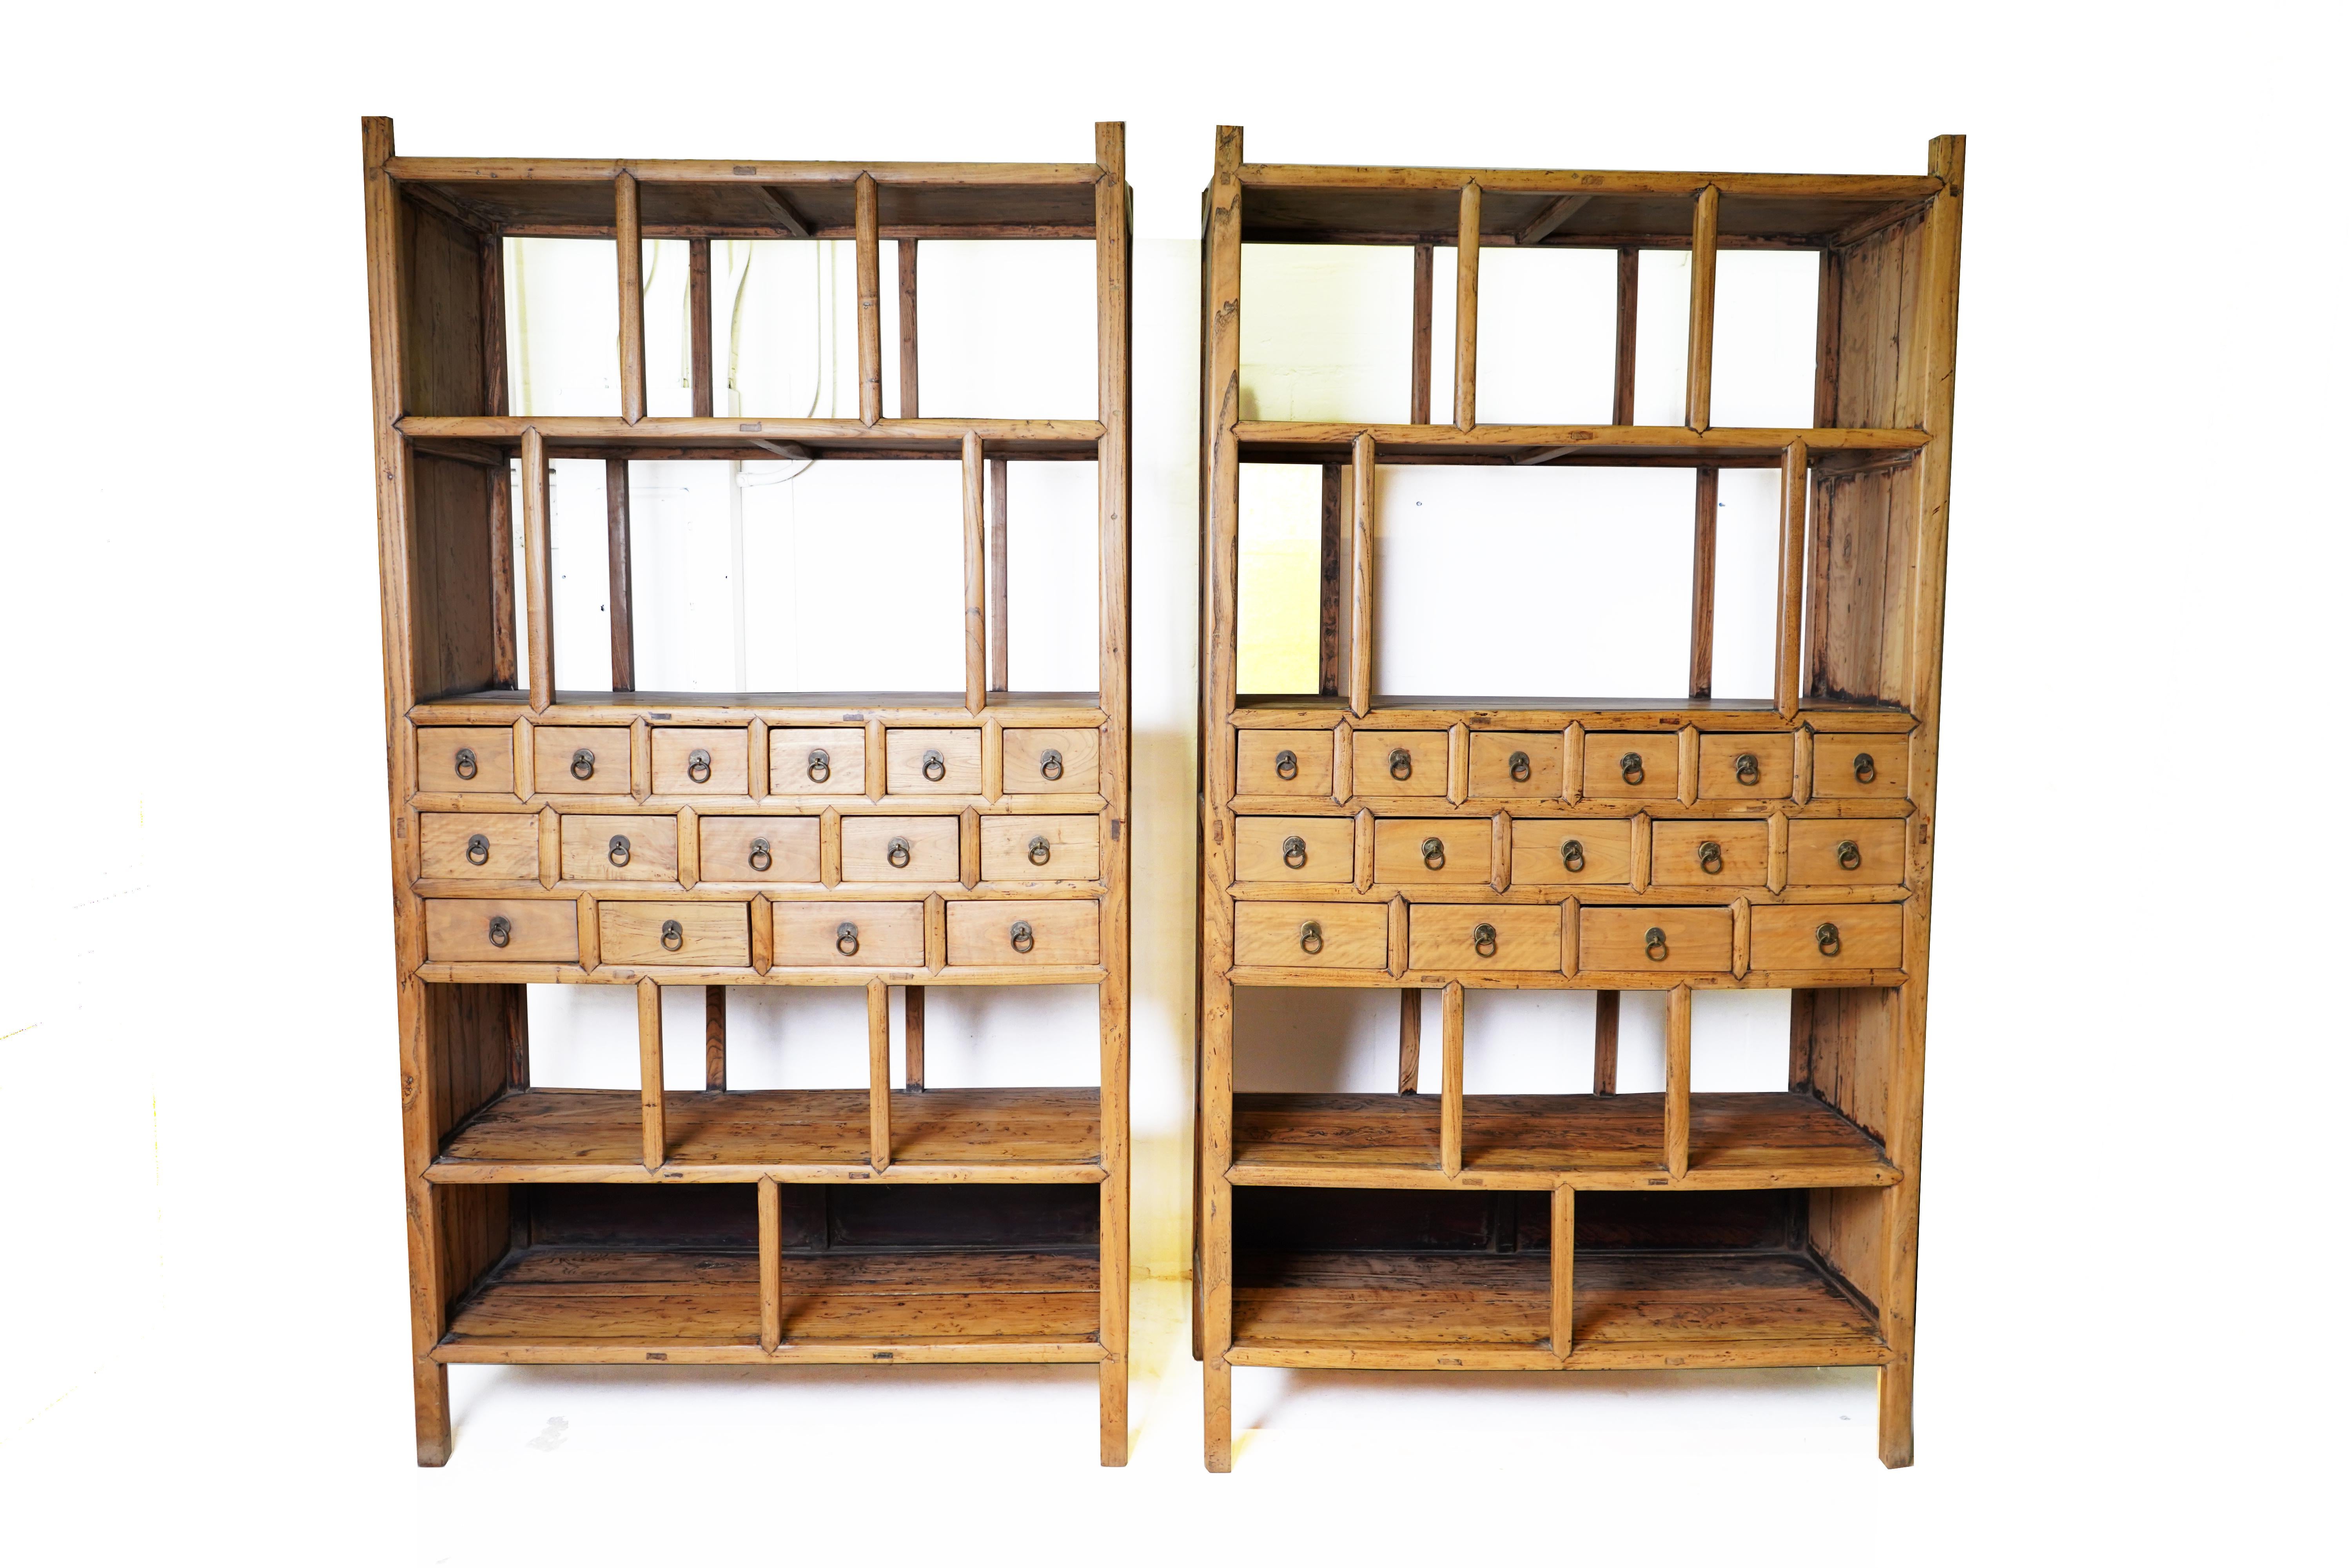 Traditional Chinese medicine requires the use of hundreds of herbs, minerals, and liquid extracts to treat the full range of human maladies. Large multi-drawer chests were used to store sets of the most common medicinal ingredients which were